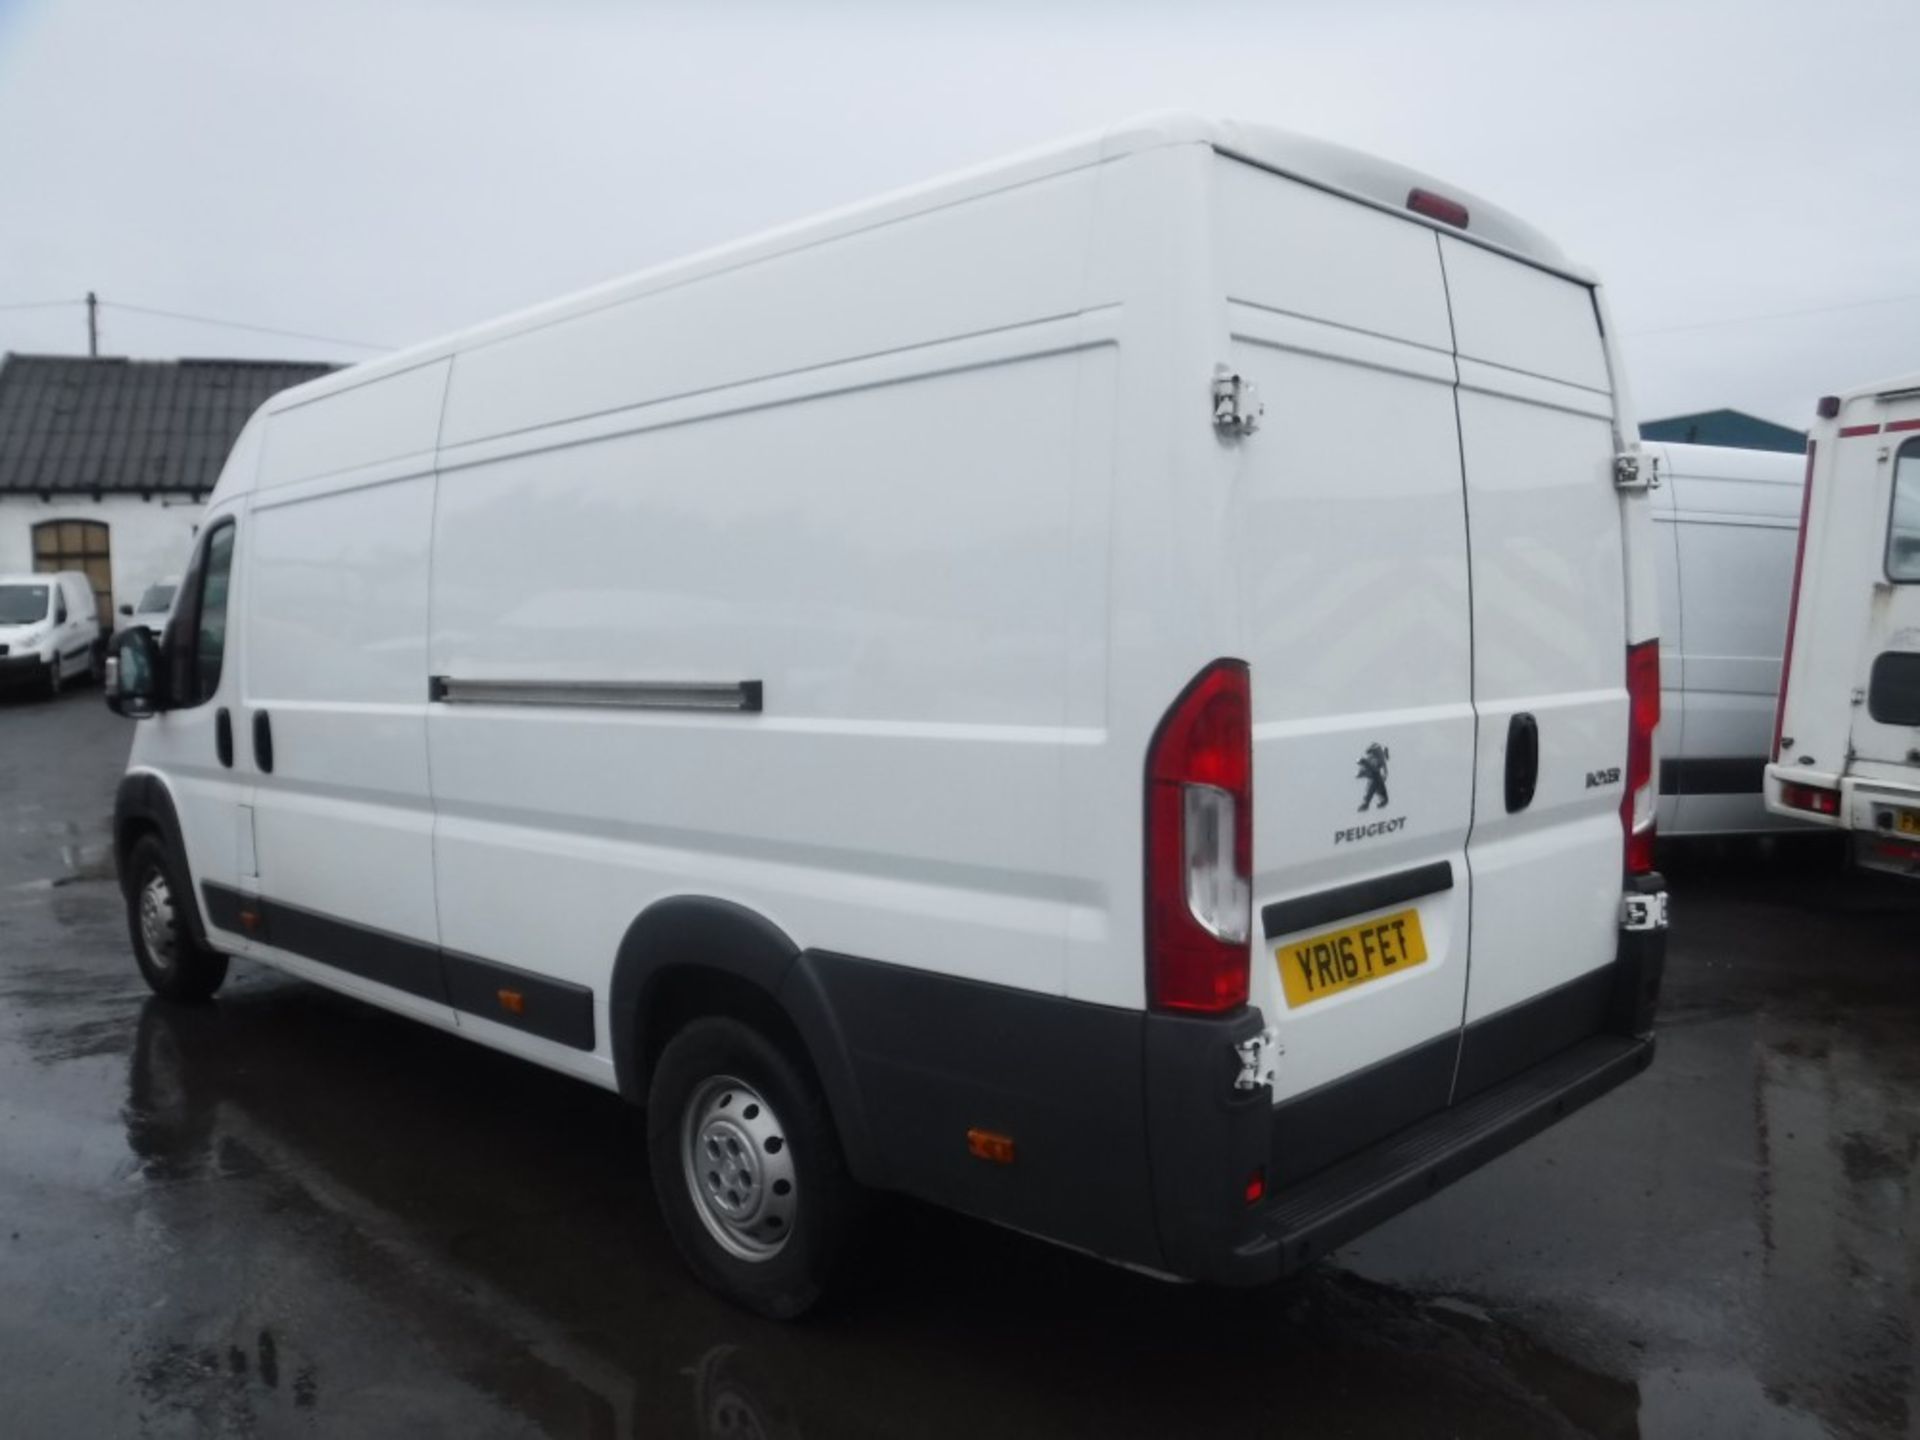 16 reg PEUGEOT BOXER 435 PROFESSIONAL HDI, 1ST REG 06/16, 161590M WARRANTED, V5 HERE, 1 OWNER FROM - Image 3 of 6